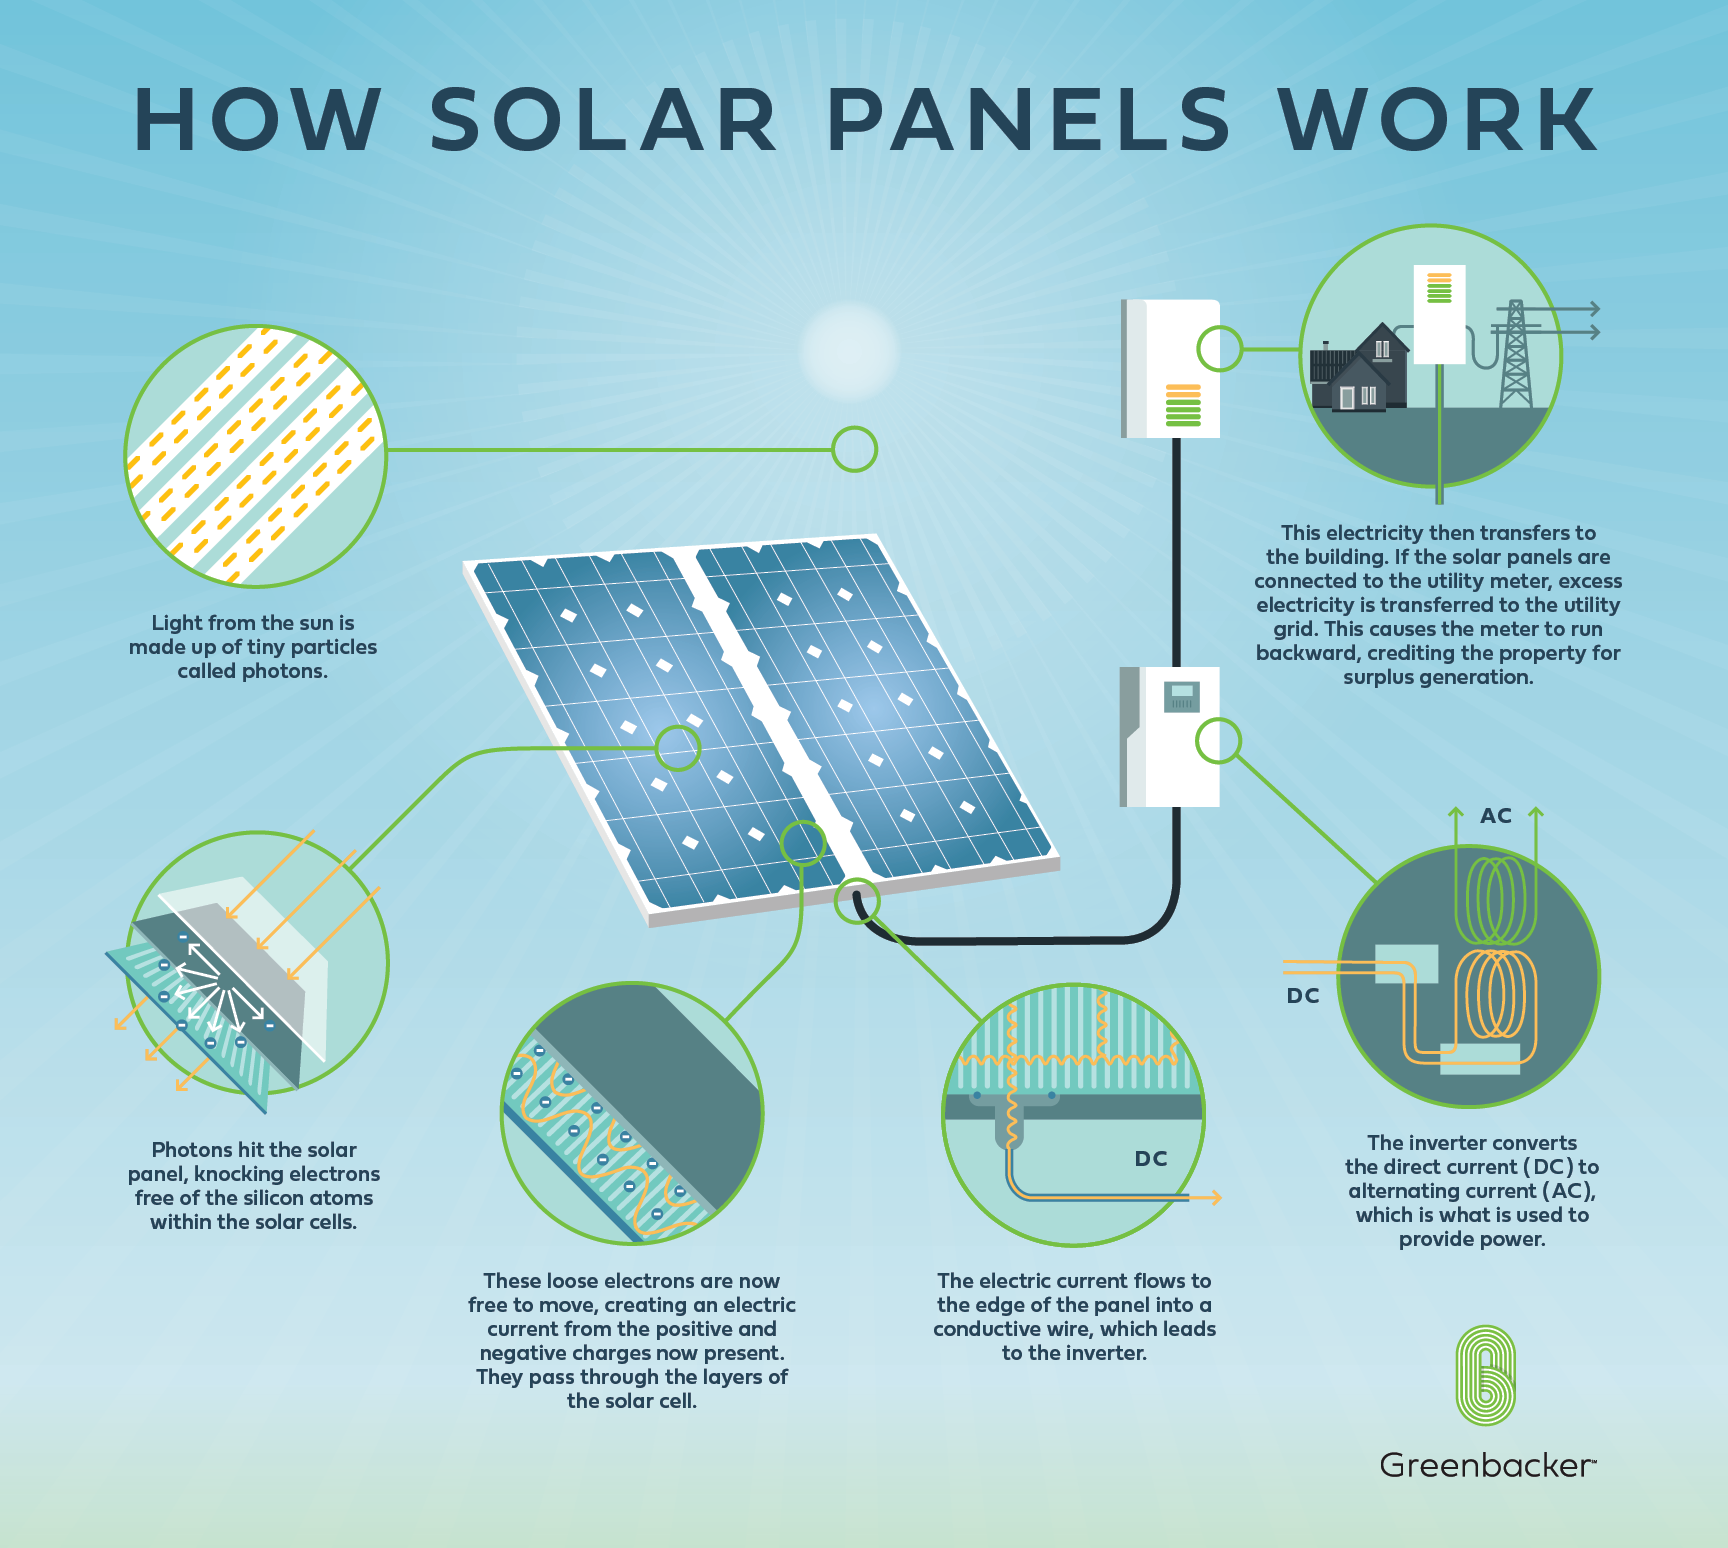 Why solar panels are becoming increasingly popular - Ghesolar